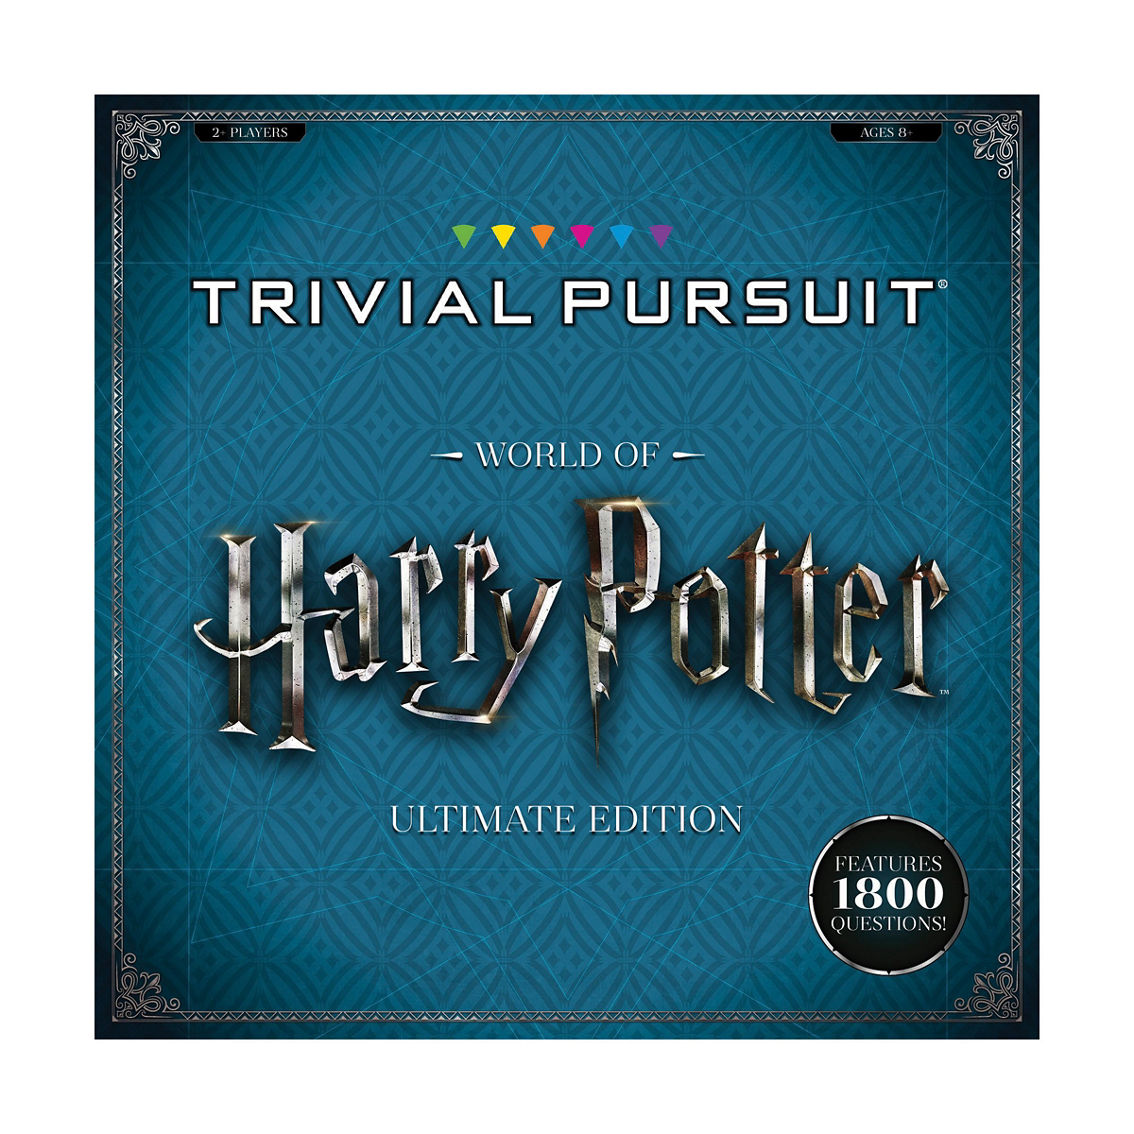 USAopoly Trivial Pursuit - World of Harry Potter Ultimate Edition - Image 2 of 5